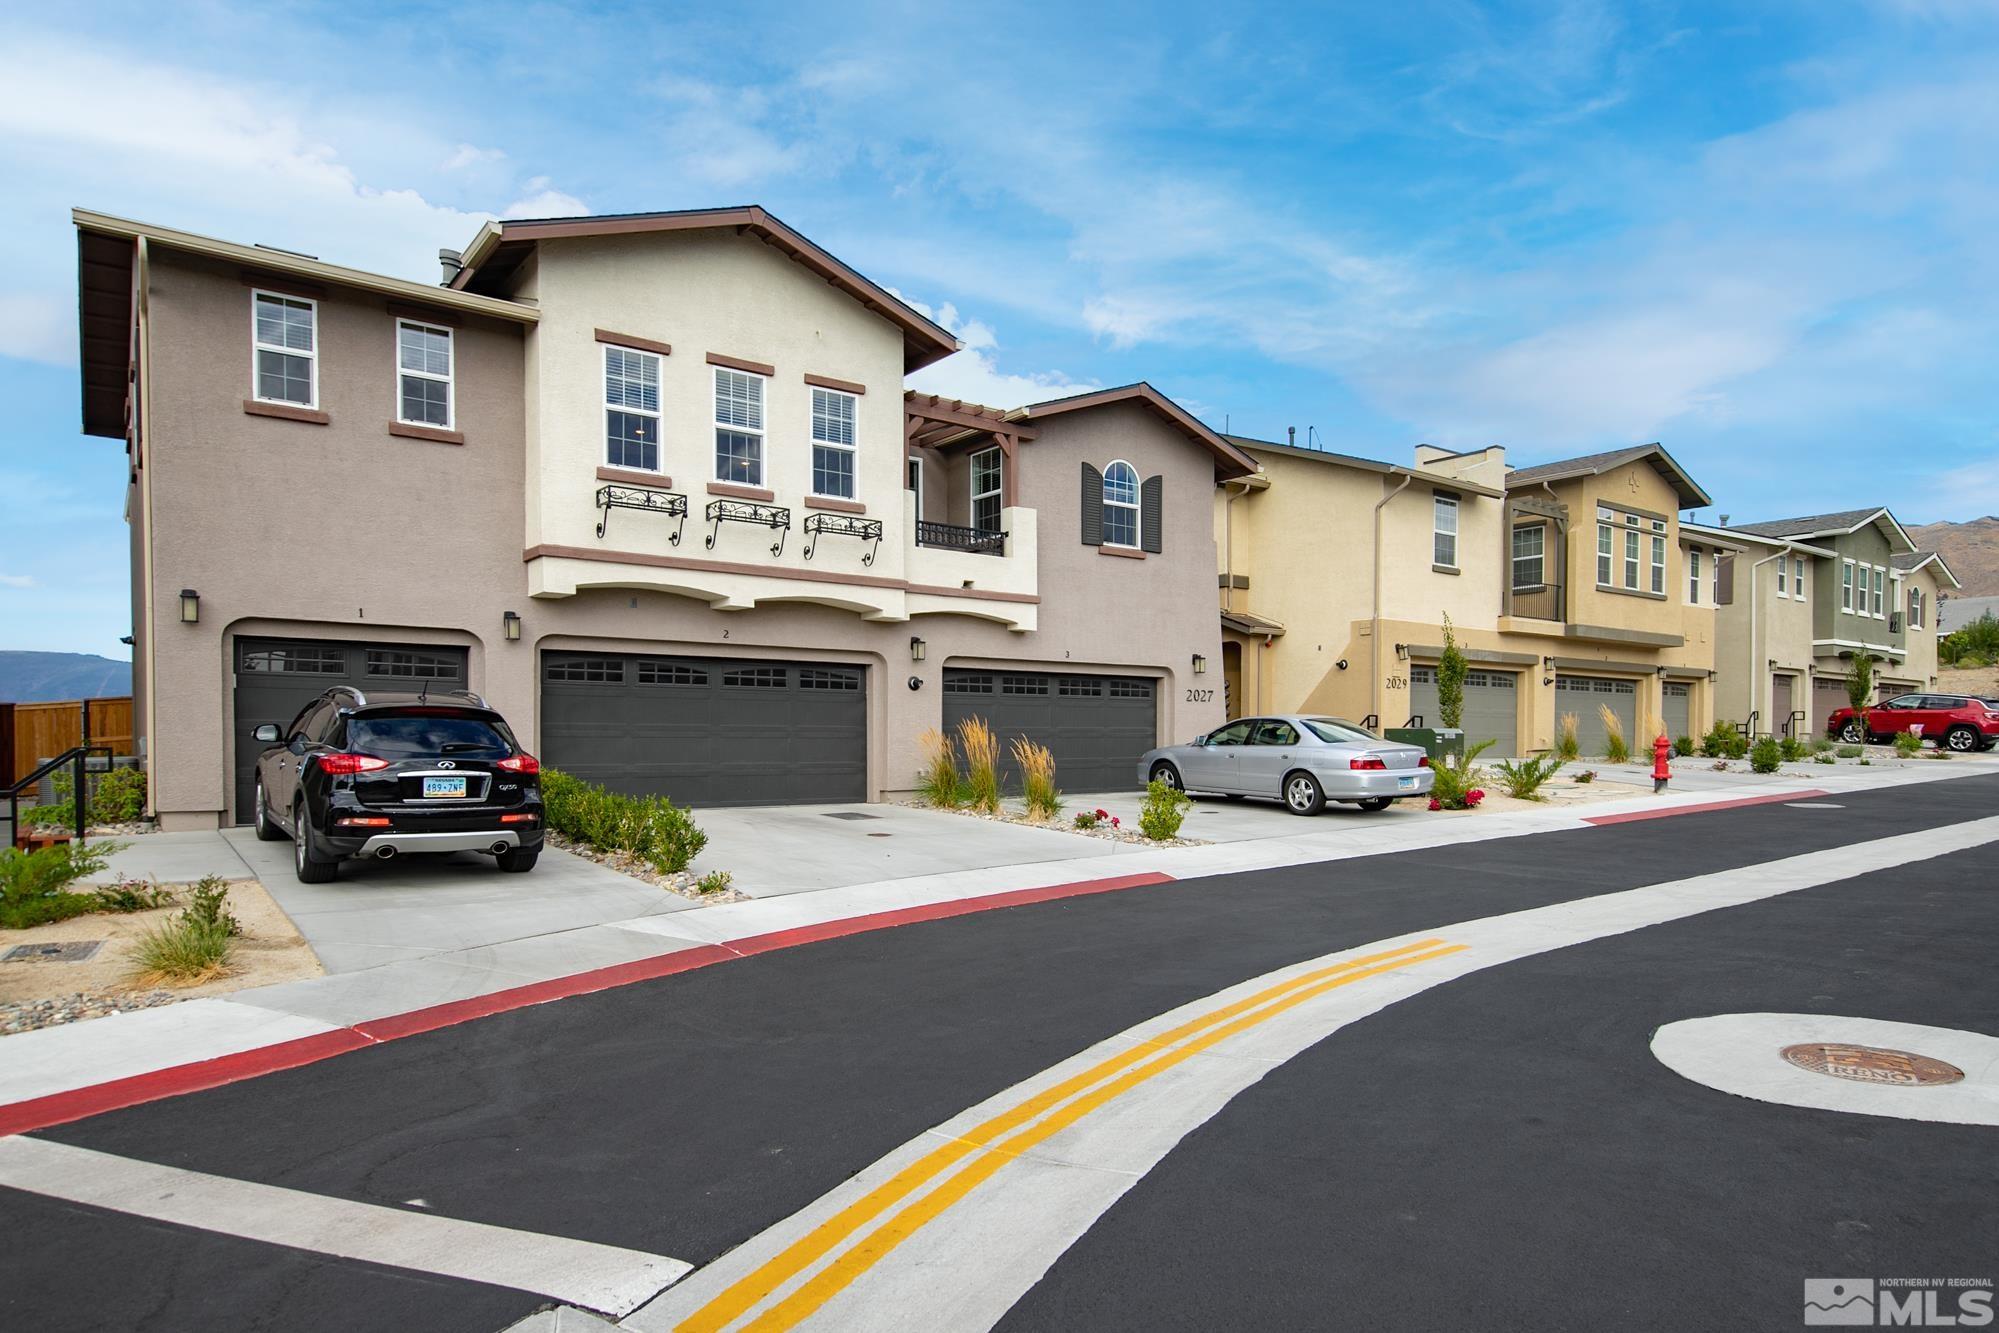 Condos, Lofts and Townhomes for Sale in New Construction Condos in the Reno Area